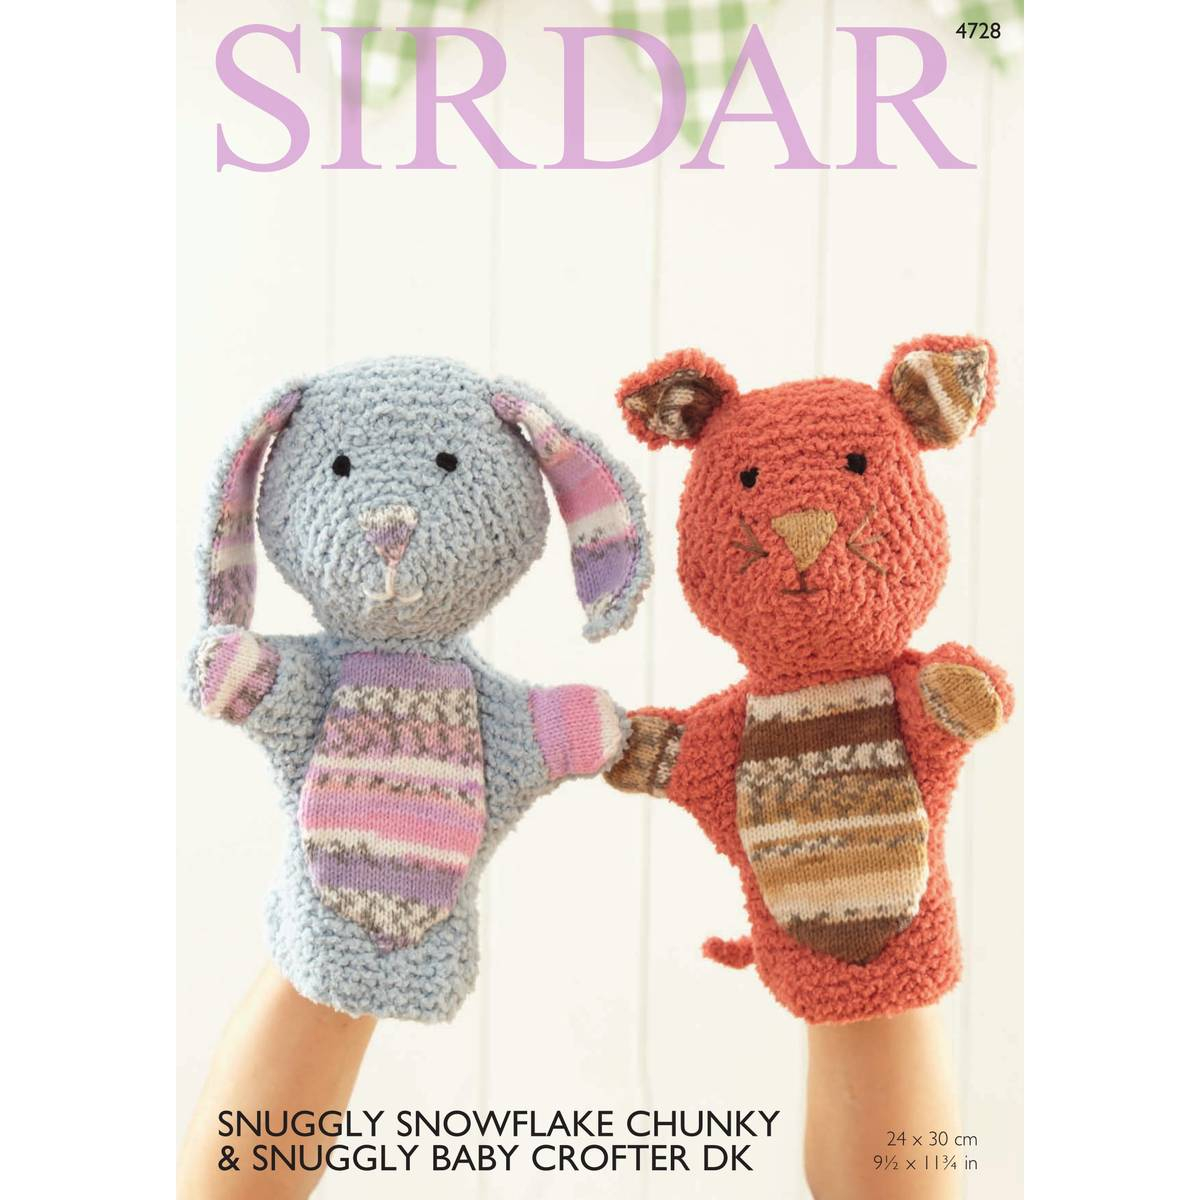 Snowflake Pattern Knitting Sirdar Snuggly Ba Crofter Dk And Snuggly Snowflake Chunky Hand Puppets Digital Pattern 4728